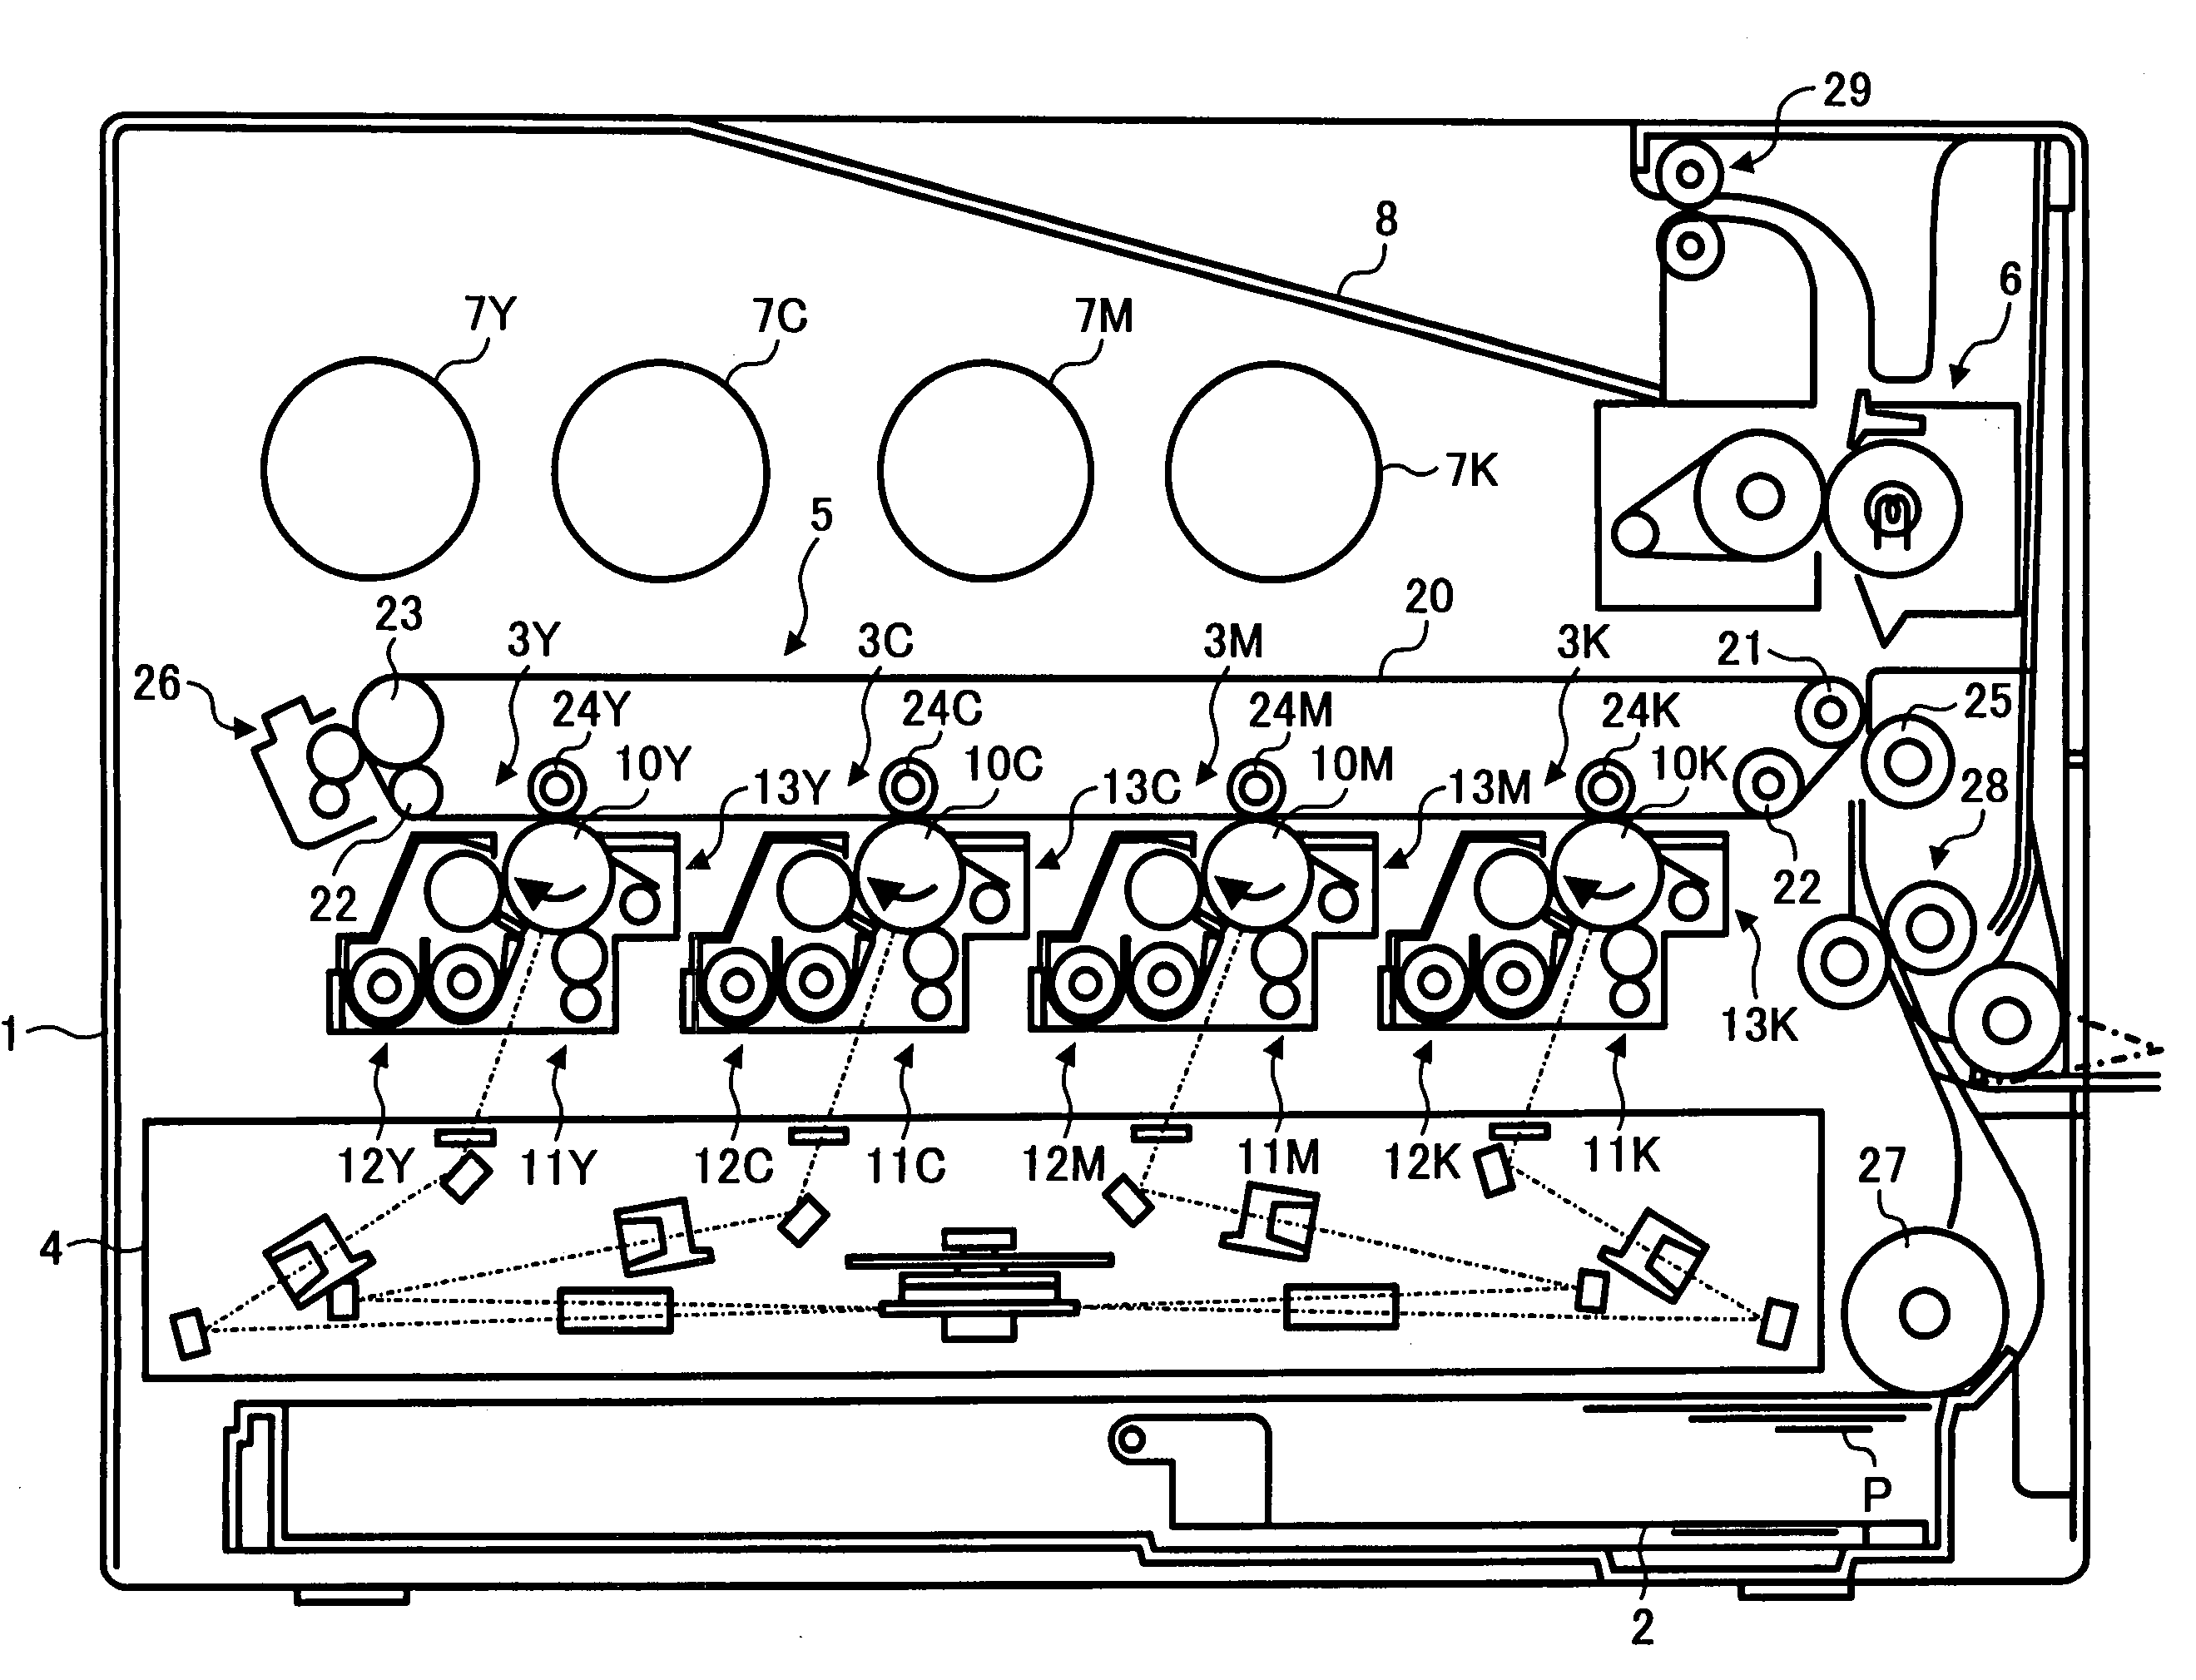 Image forming apparatus including a magnetic brush developing system using a two-component developer comprising toner and carrier